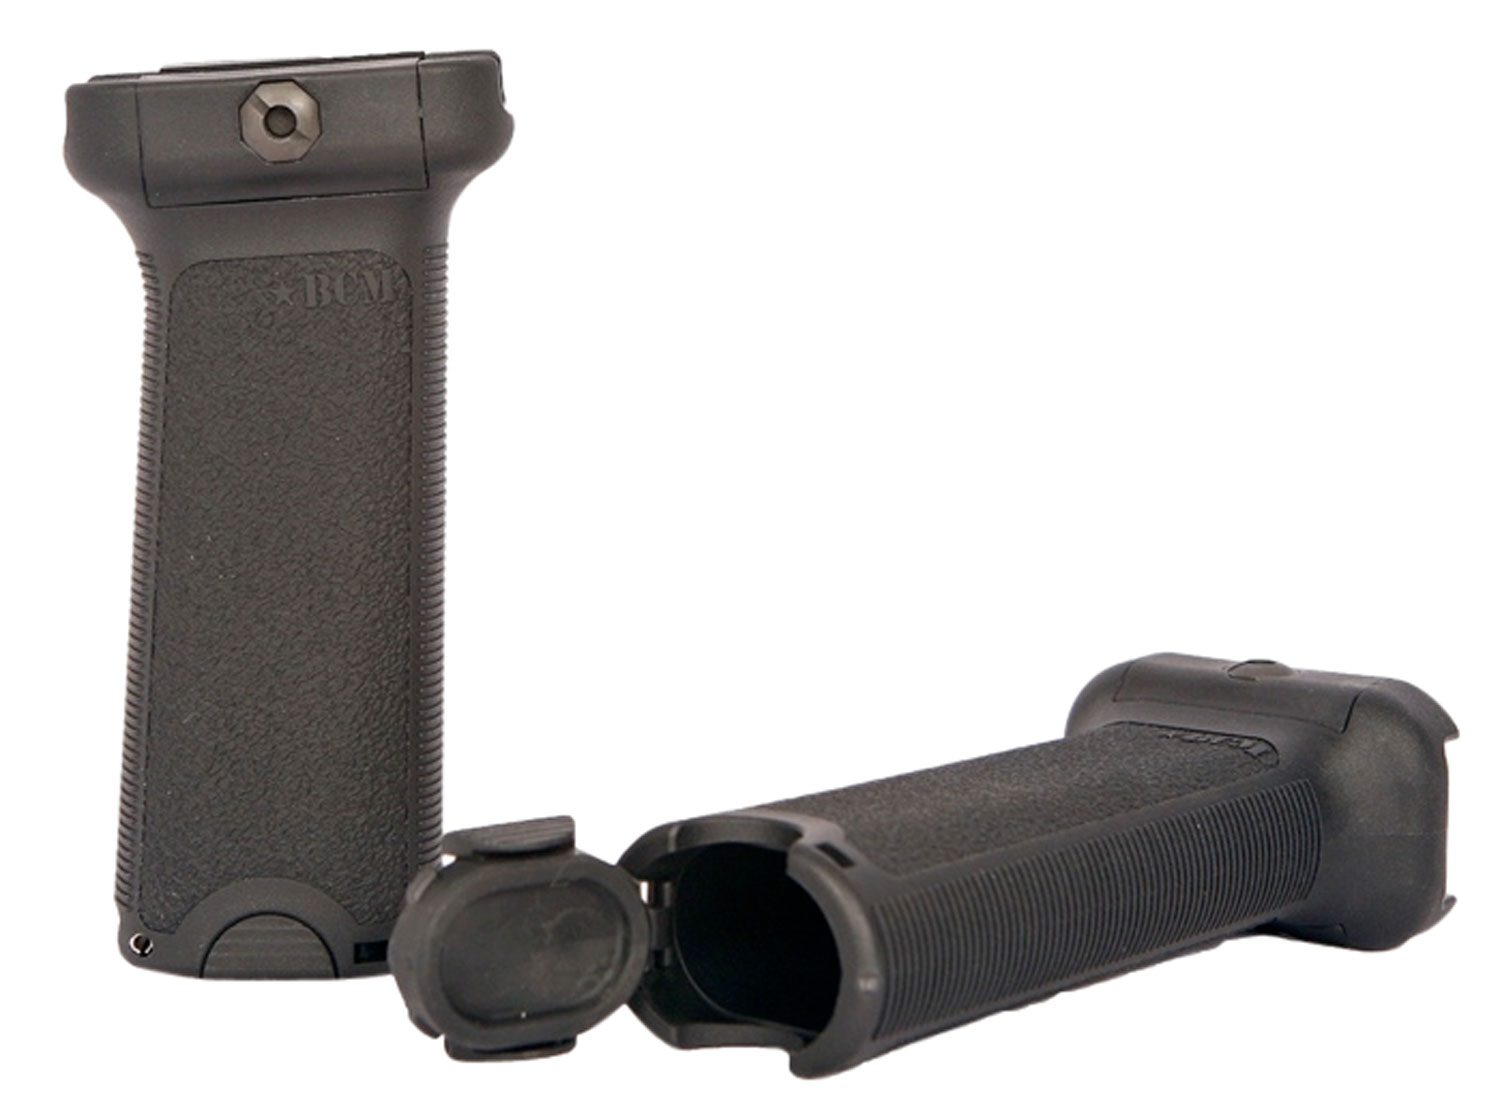 BCM GFVGBLK BCMGunfighter Vertical Grip Made of Polymer With Black Aggressive Textured Finish with Storage Compartment for Picatinny Rail